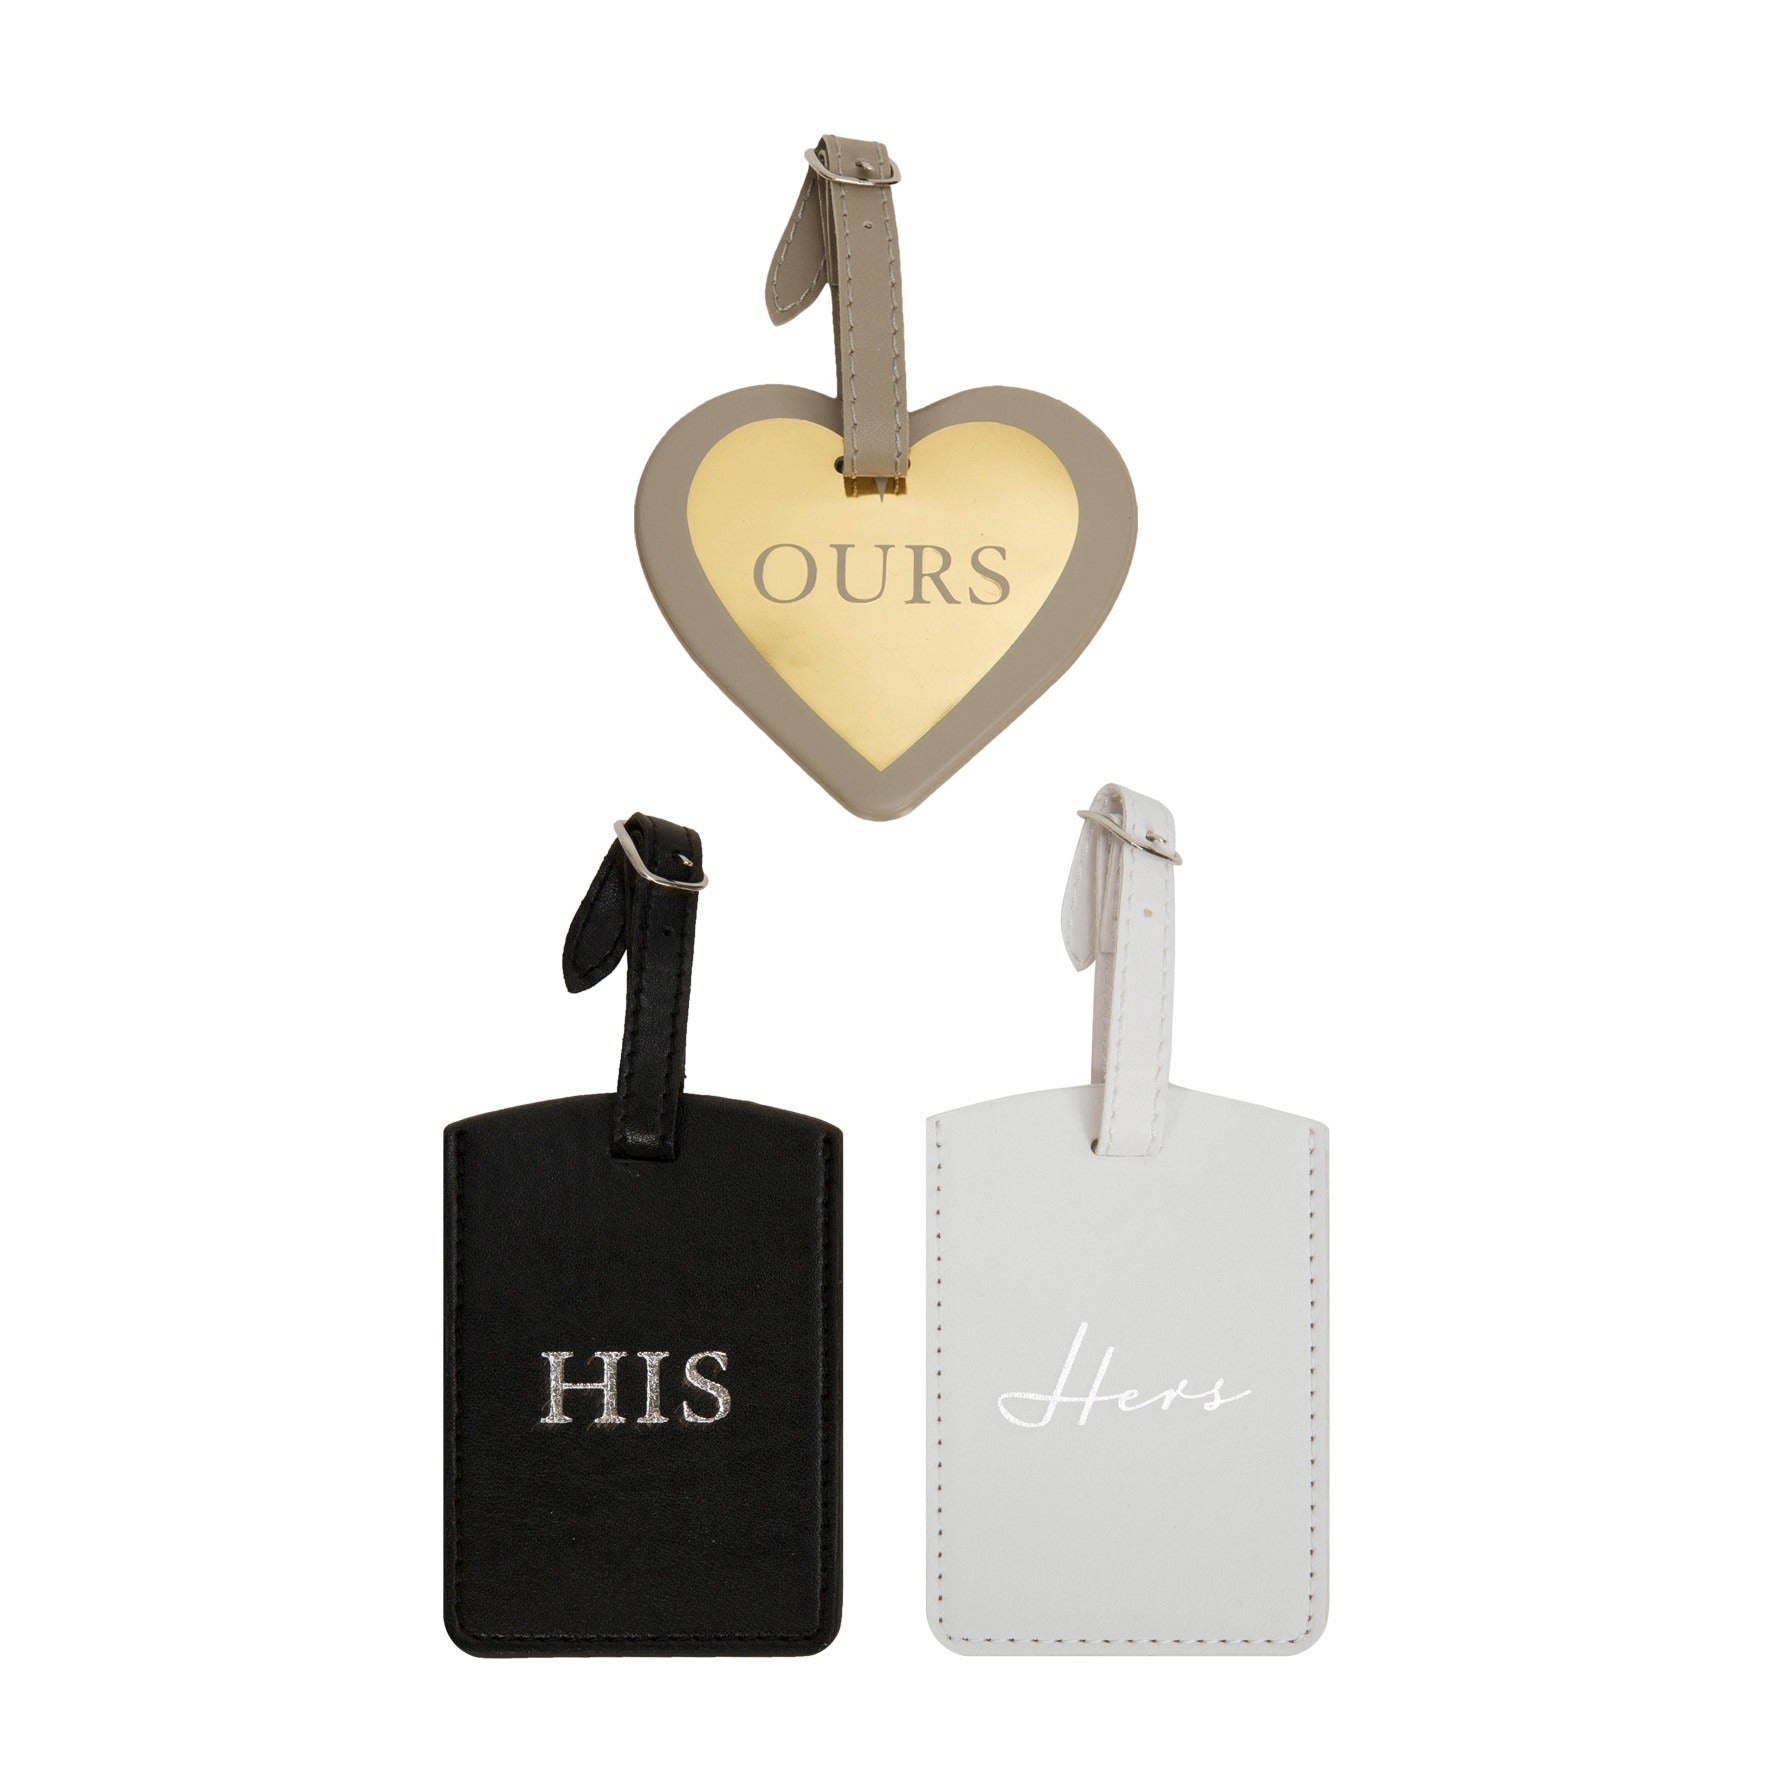 View Set Of 3 Leatherette His Hers and Ours Luggage Tags information